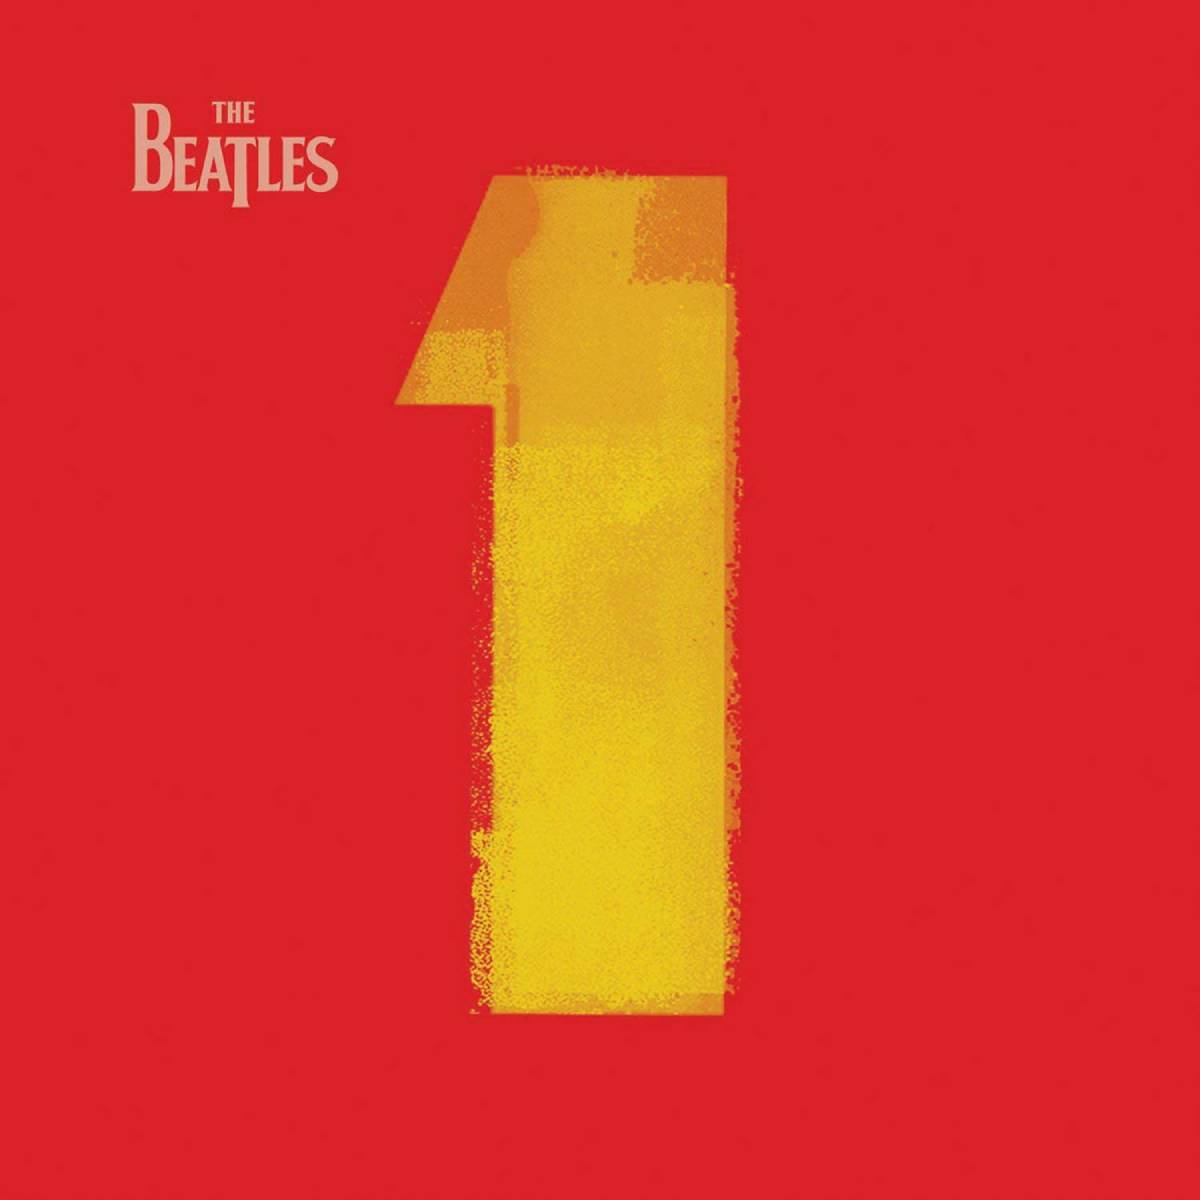 Cover of the Beatles' compilation entitled "1